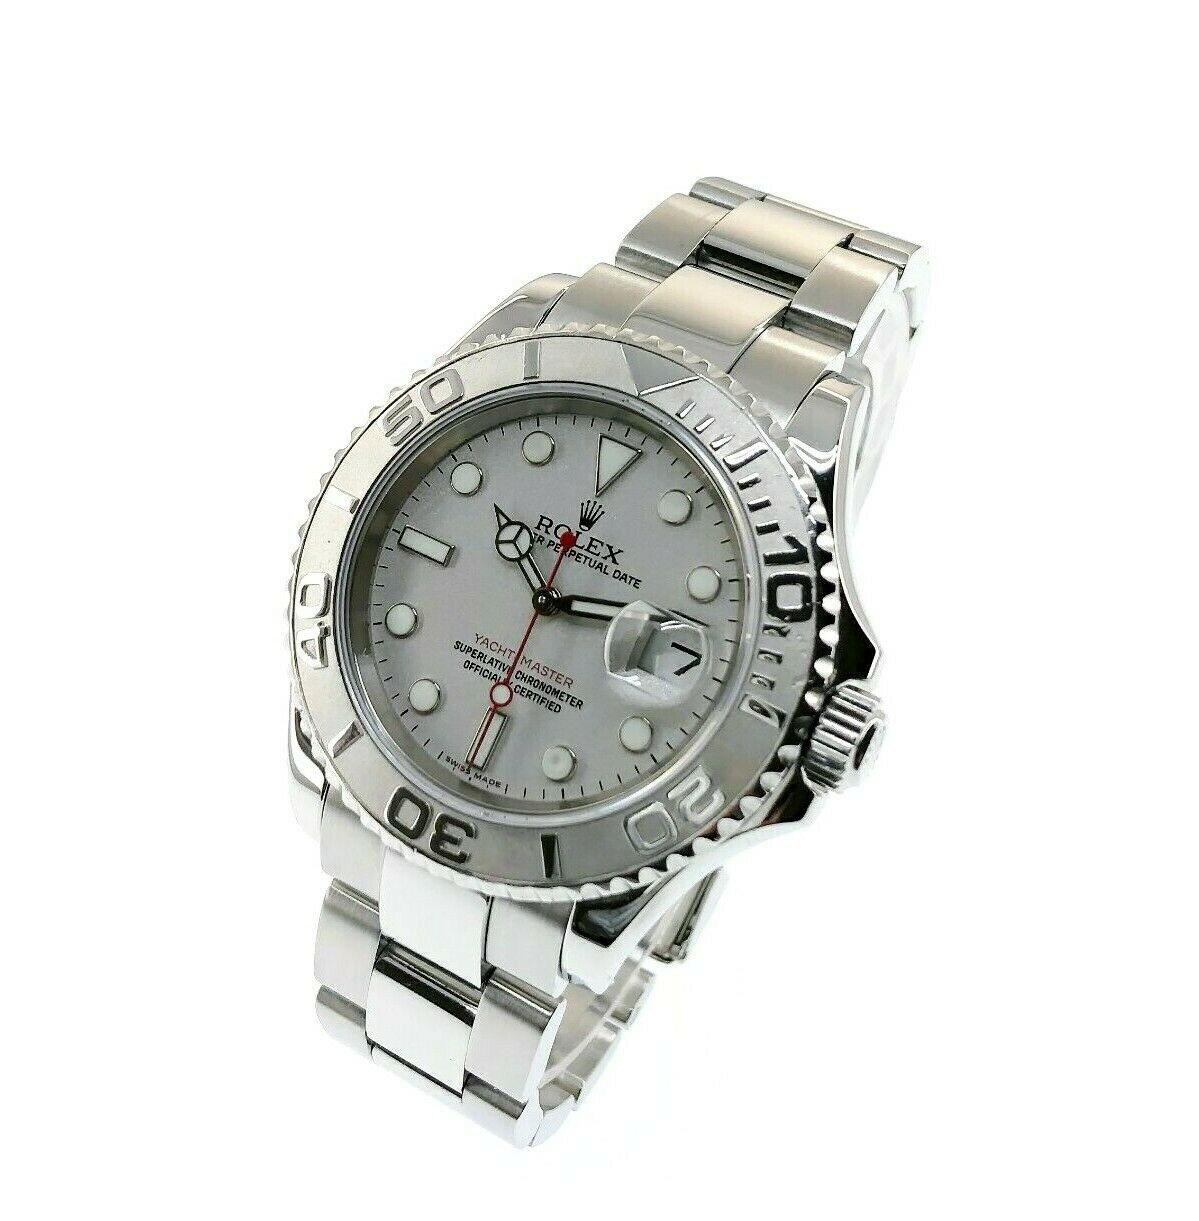 Rolex 40MM Mens Yacht-Master Platinum and Steel Watch Ref # 16622 Box and Card